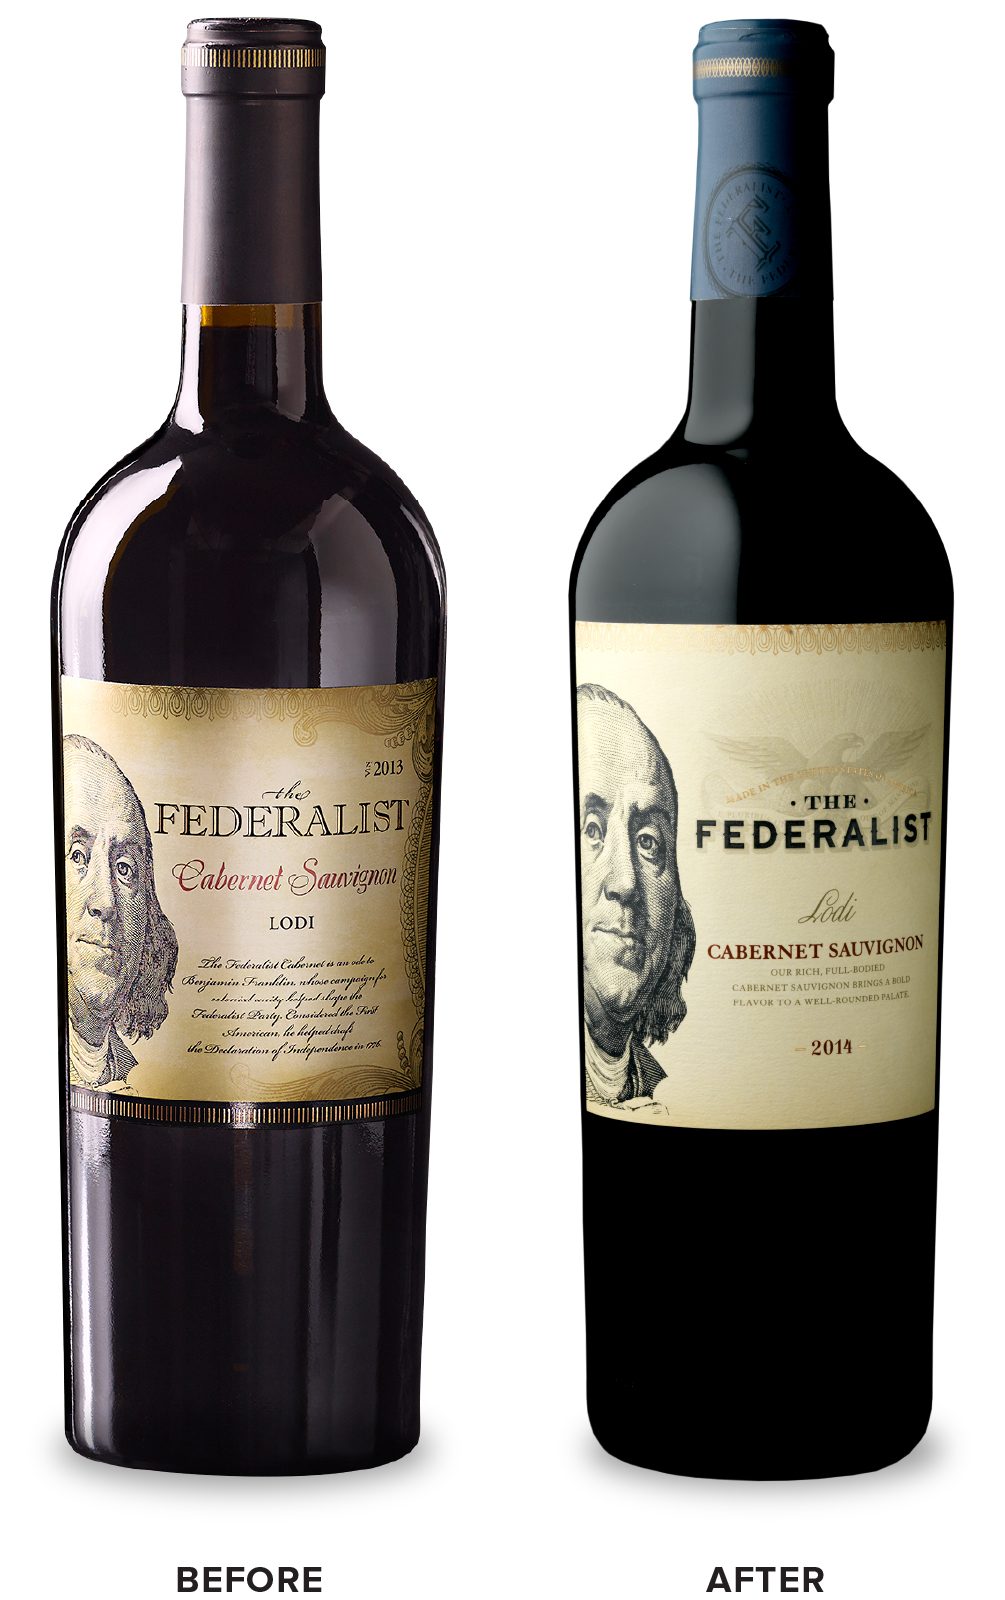 The Federalist Lodi Cabernet Sauvignon Wine Packaging Before Redesign on Left & After on Right